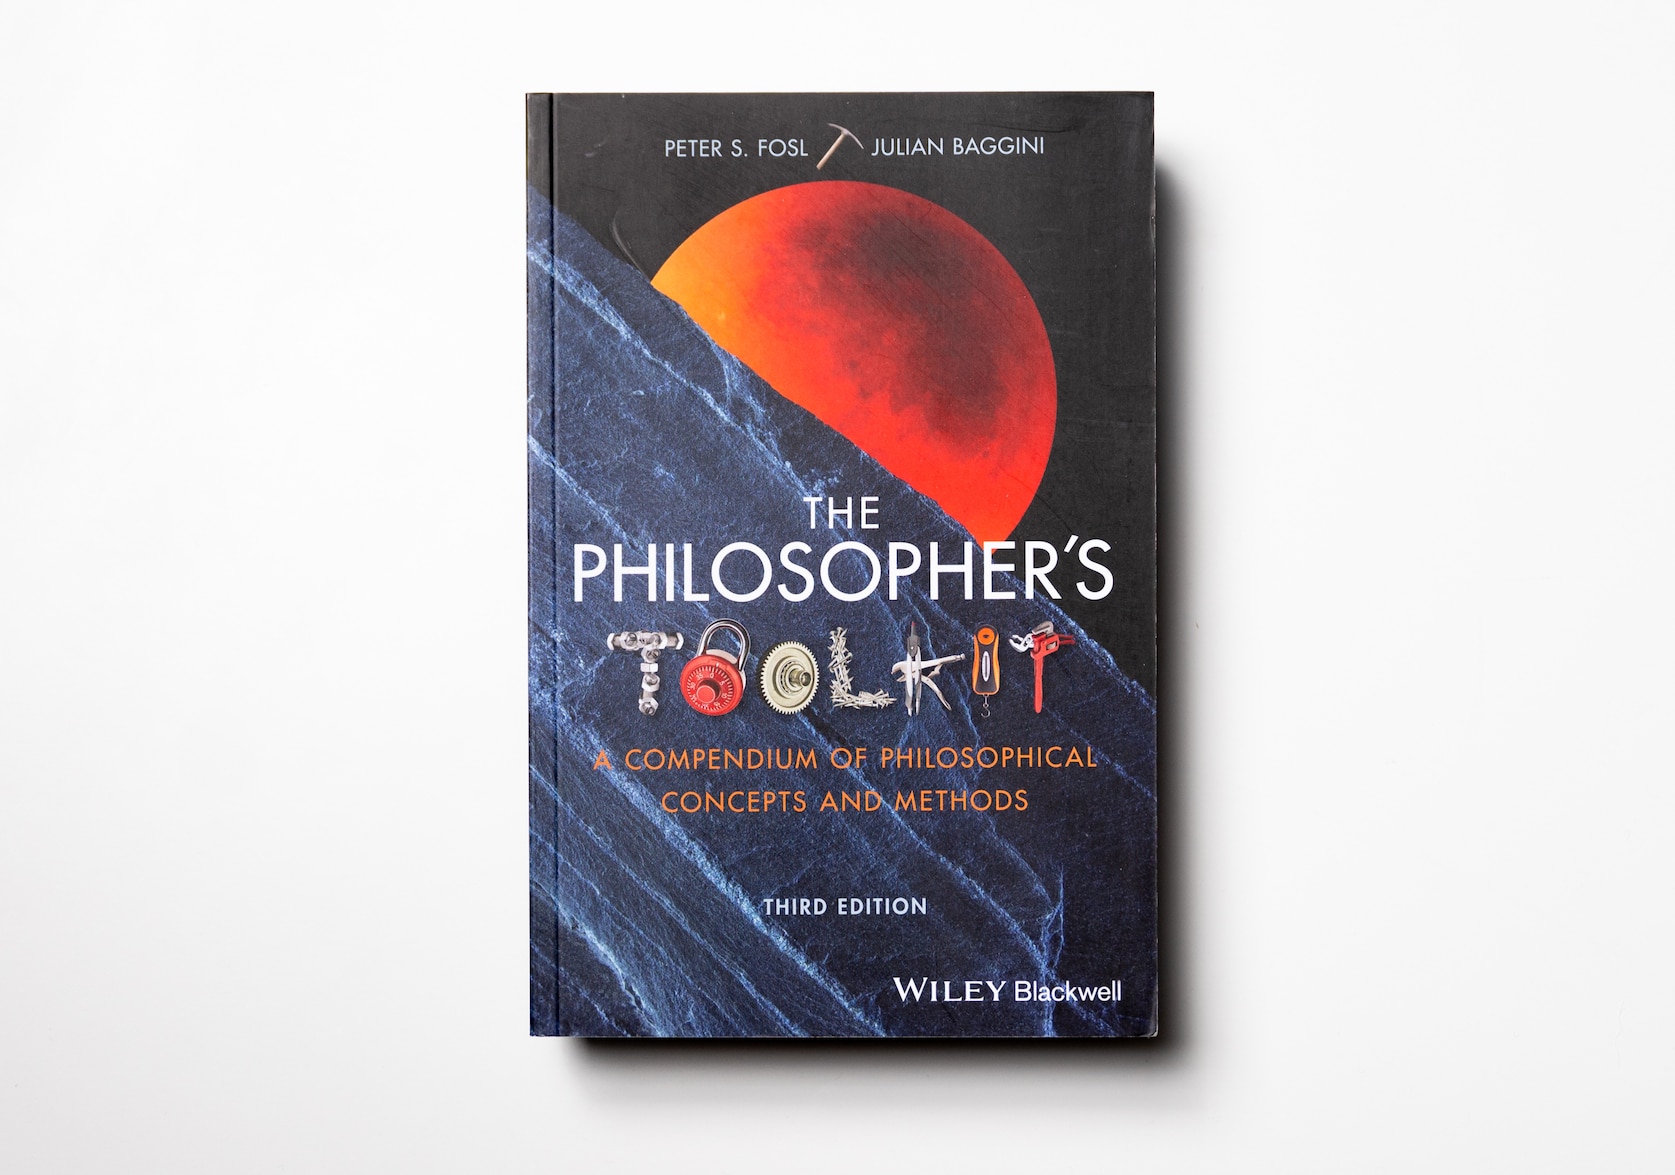 The Philosopher's Toolkit: A Compendium of Philosophical Concepts and Methods by Peter S. Fosl and Julian Baggini. Third Edition, Wiley Blackwell.